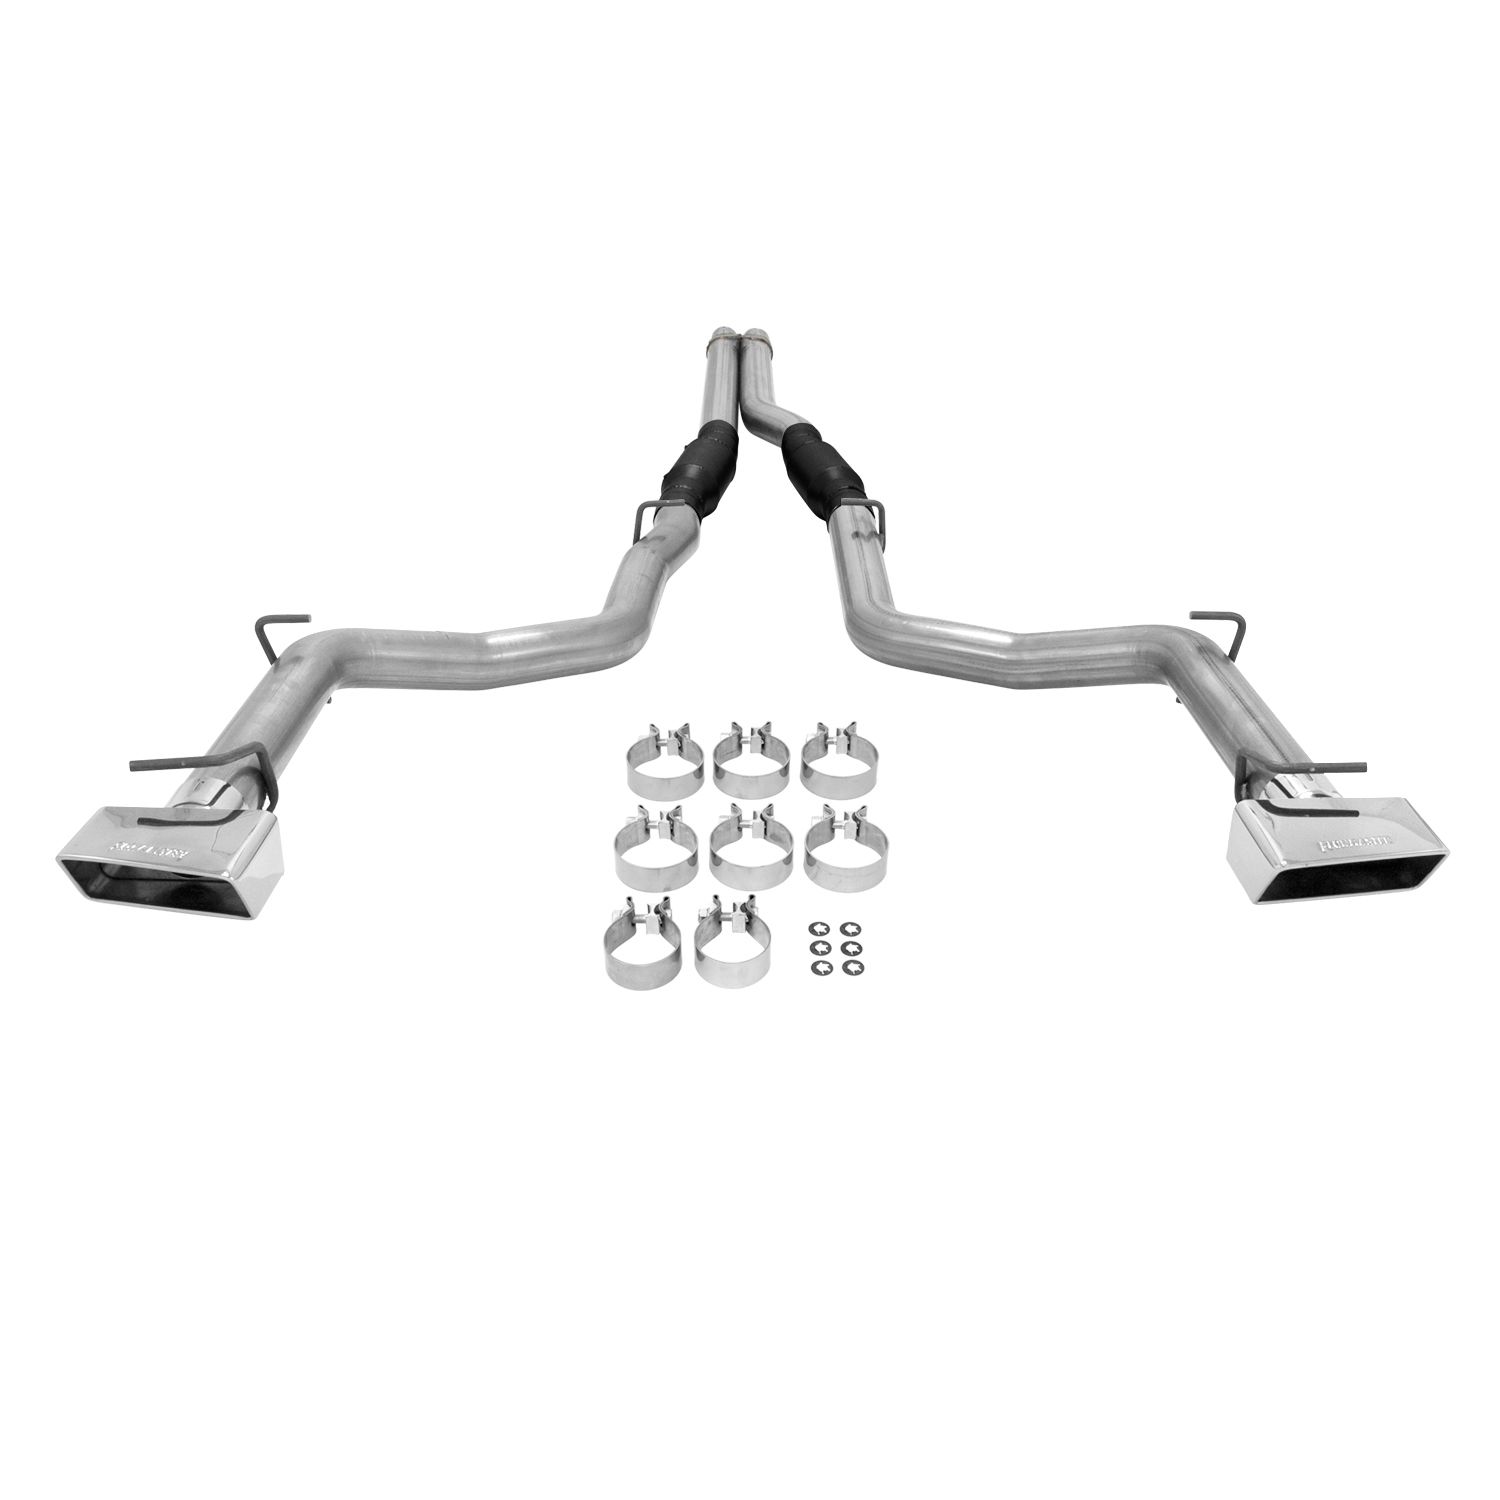 2012 Dodge Challenger R/T Classic 5.7L Flowmaster Outlaw Cat-Back Exhaust